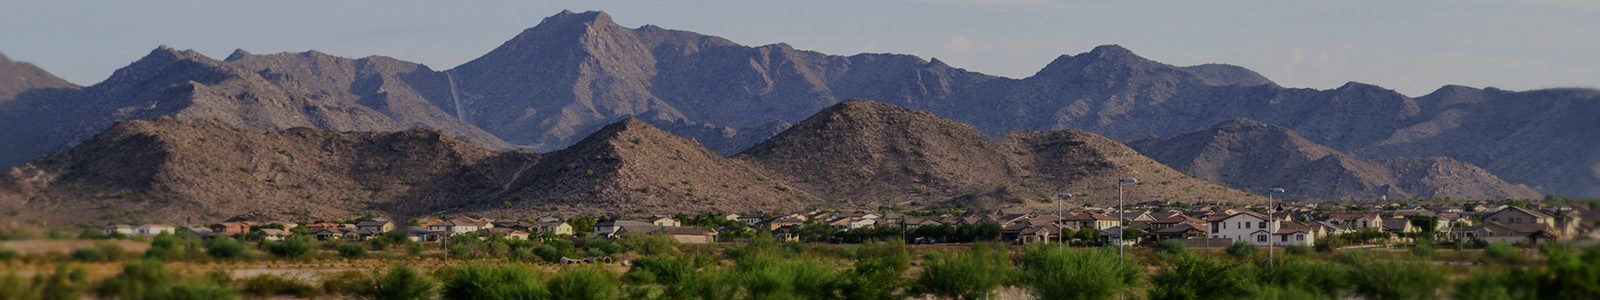 High elevation view of mountains, suburbs, and trees of phoenix